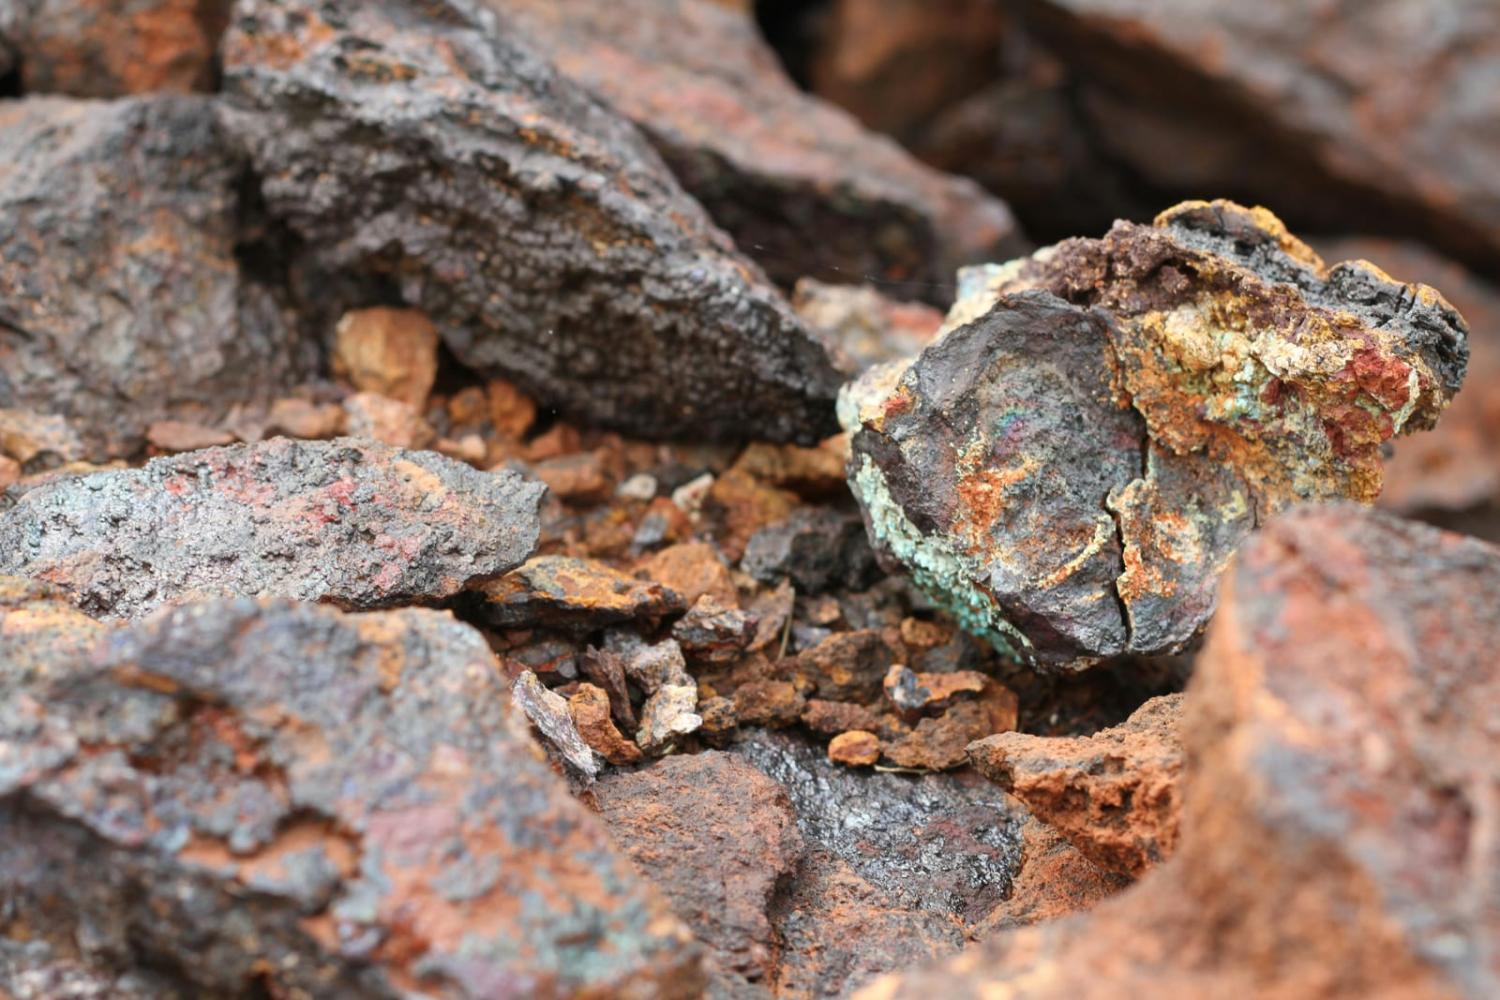 The next boom: Ore containing copper, cobalt and nickel at the Andover mine in Western Australia (Paul-Alain Hunt/Unsplash)